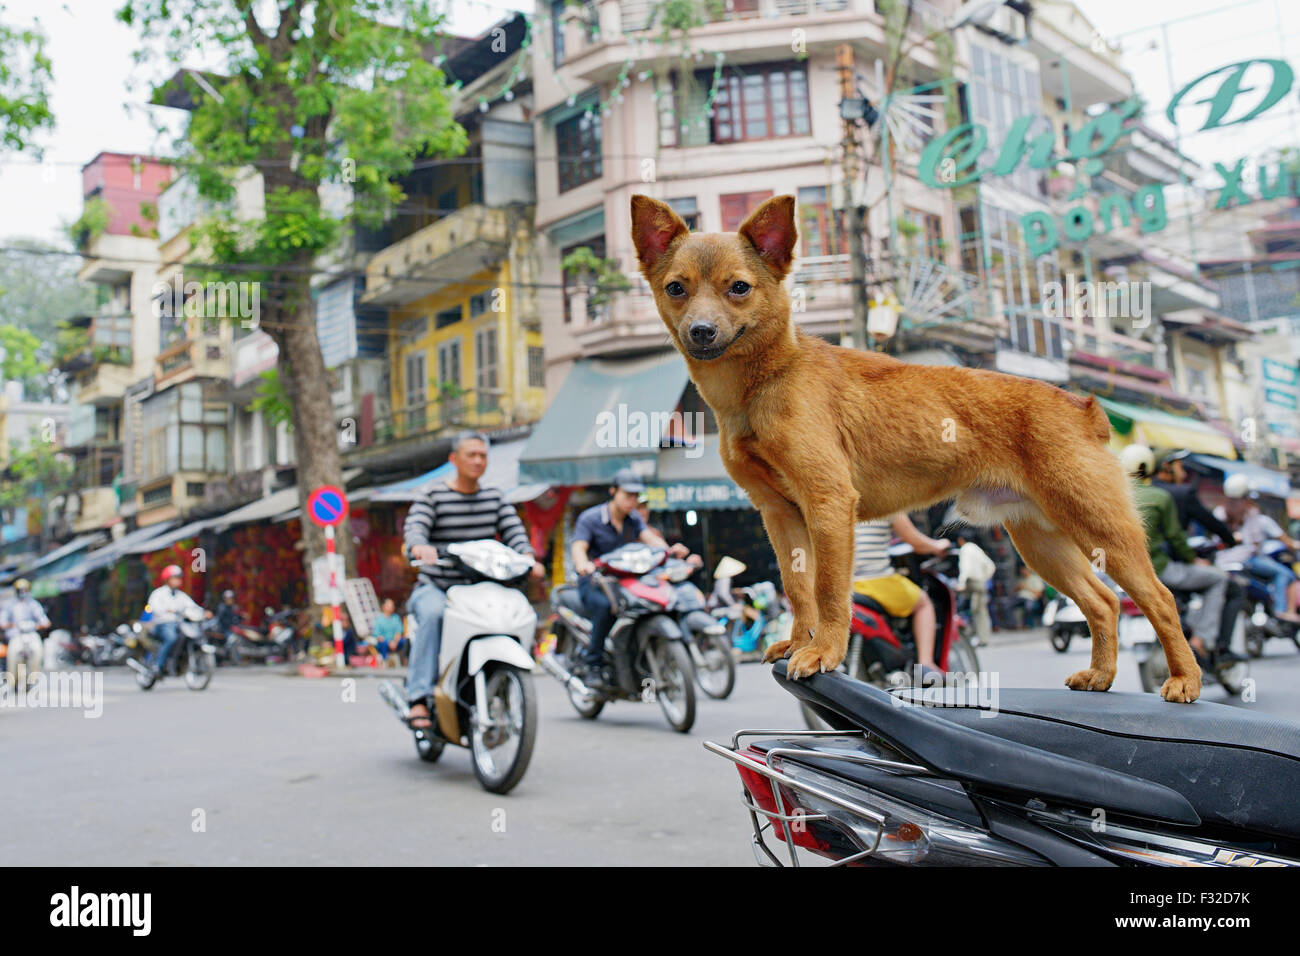 Dog standing on a scooter. Mopeds and motorbikes are everywhere in Hanoi, Vietnam. Stock Photo